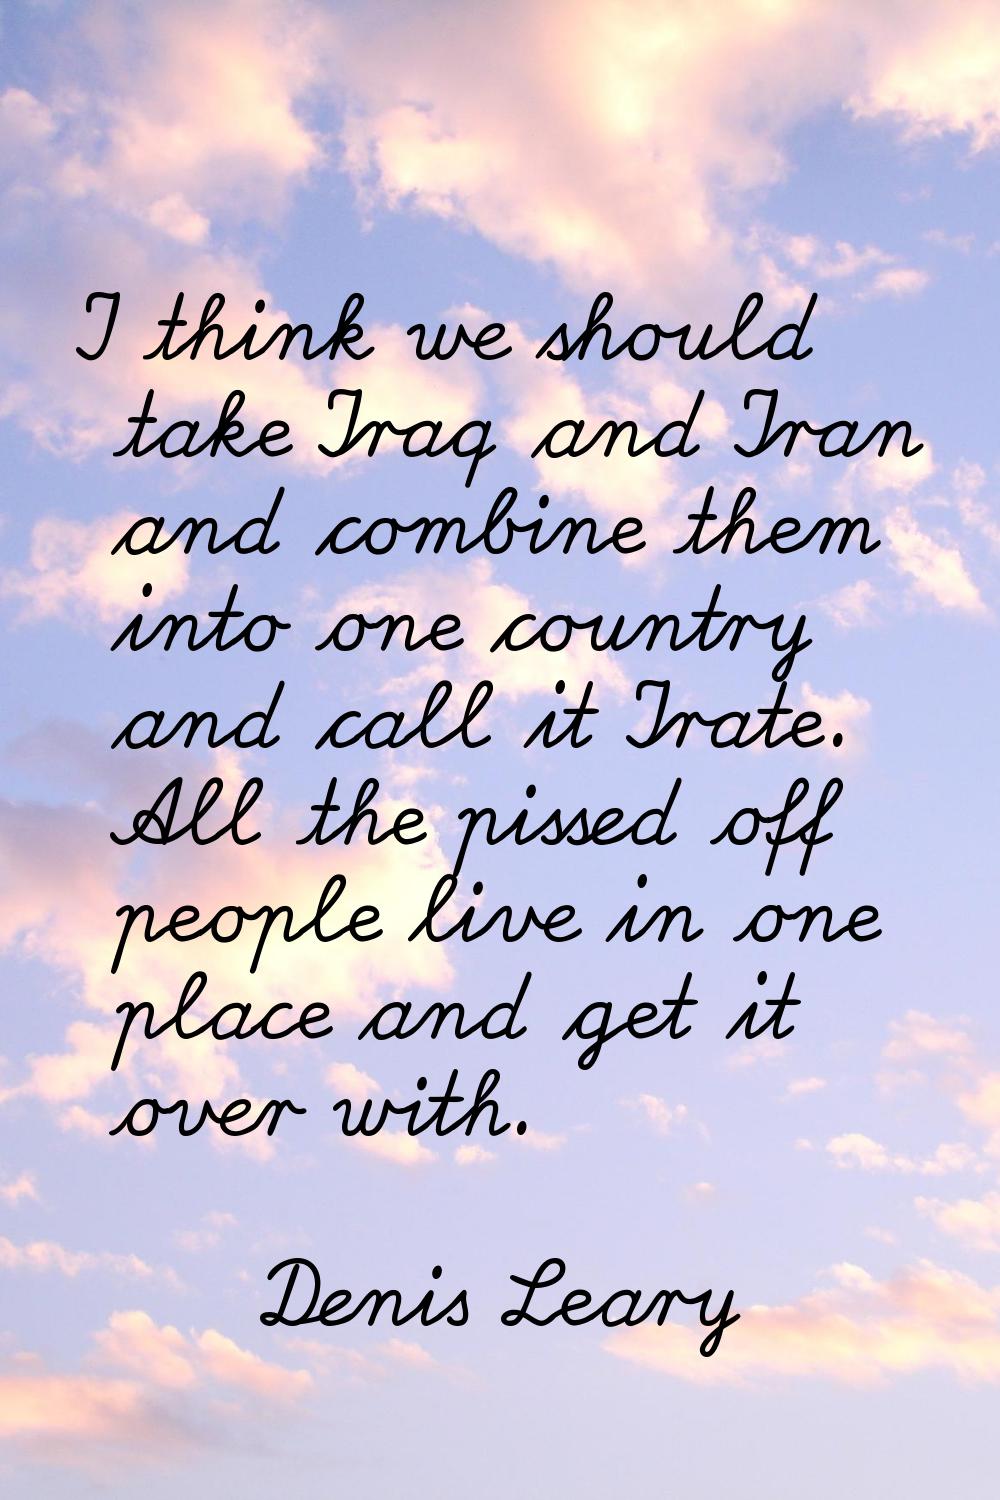 I think we should take Iraq and Iran and combine them into one country and call it Irate. All the p